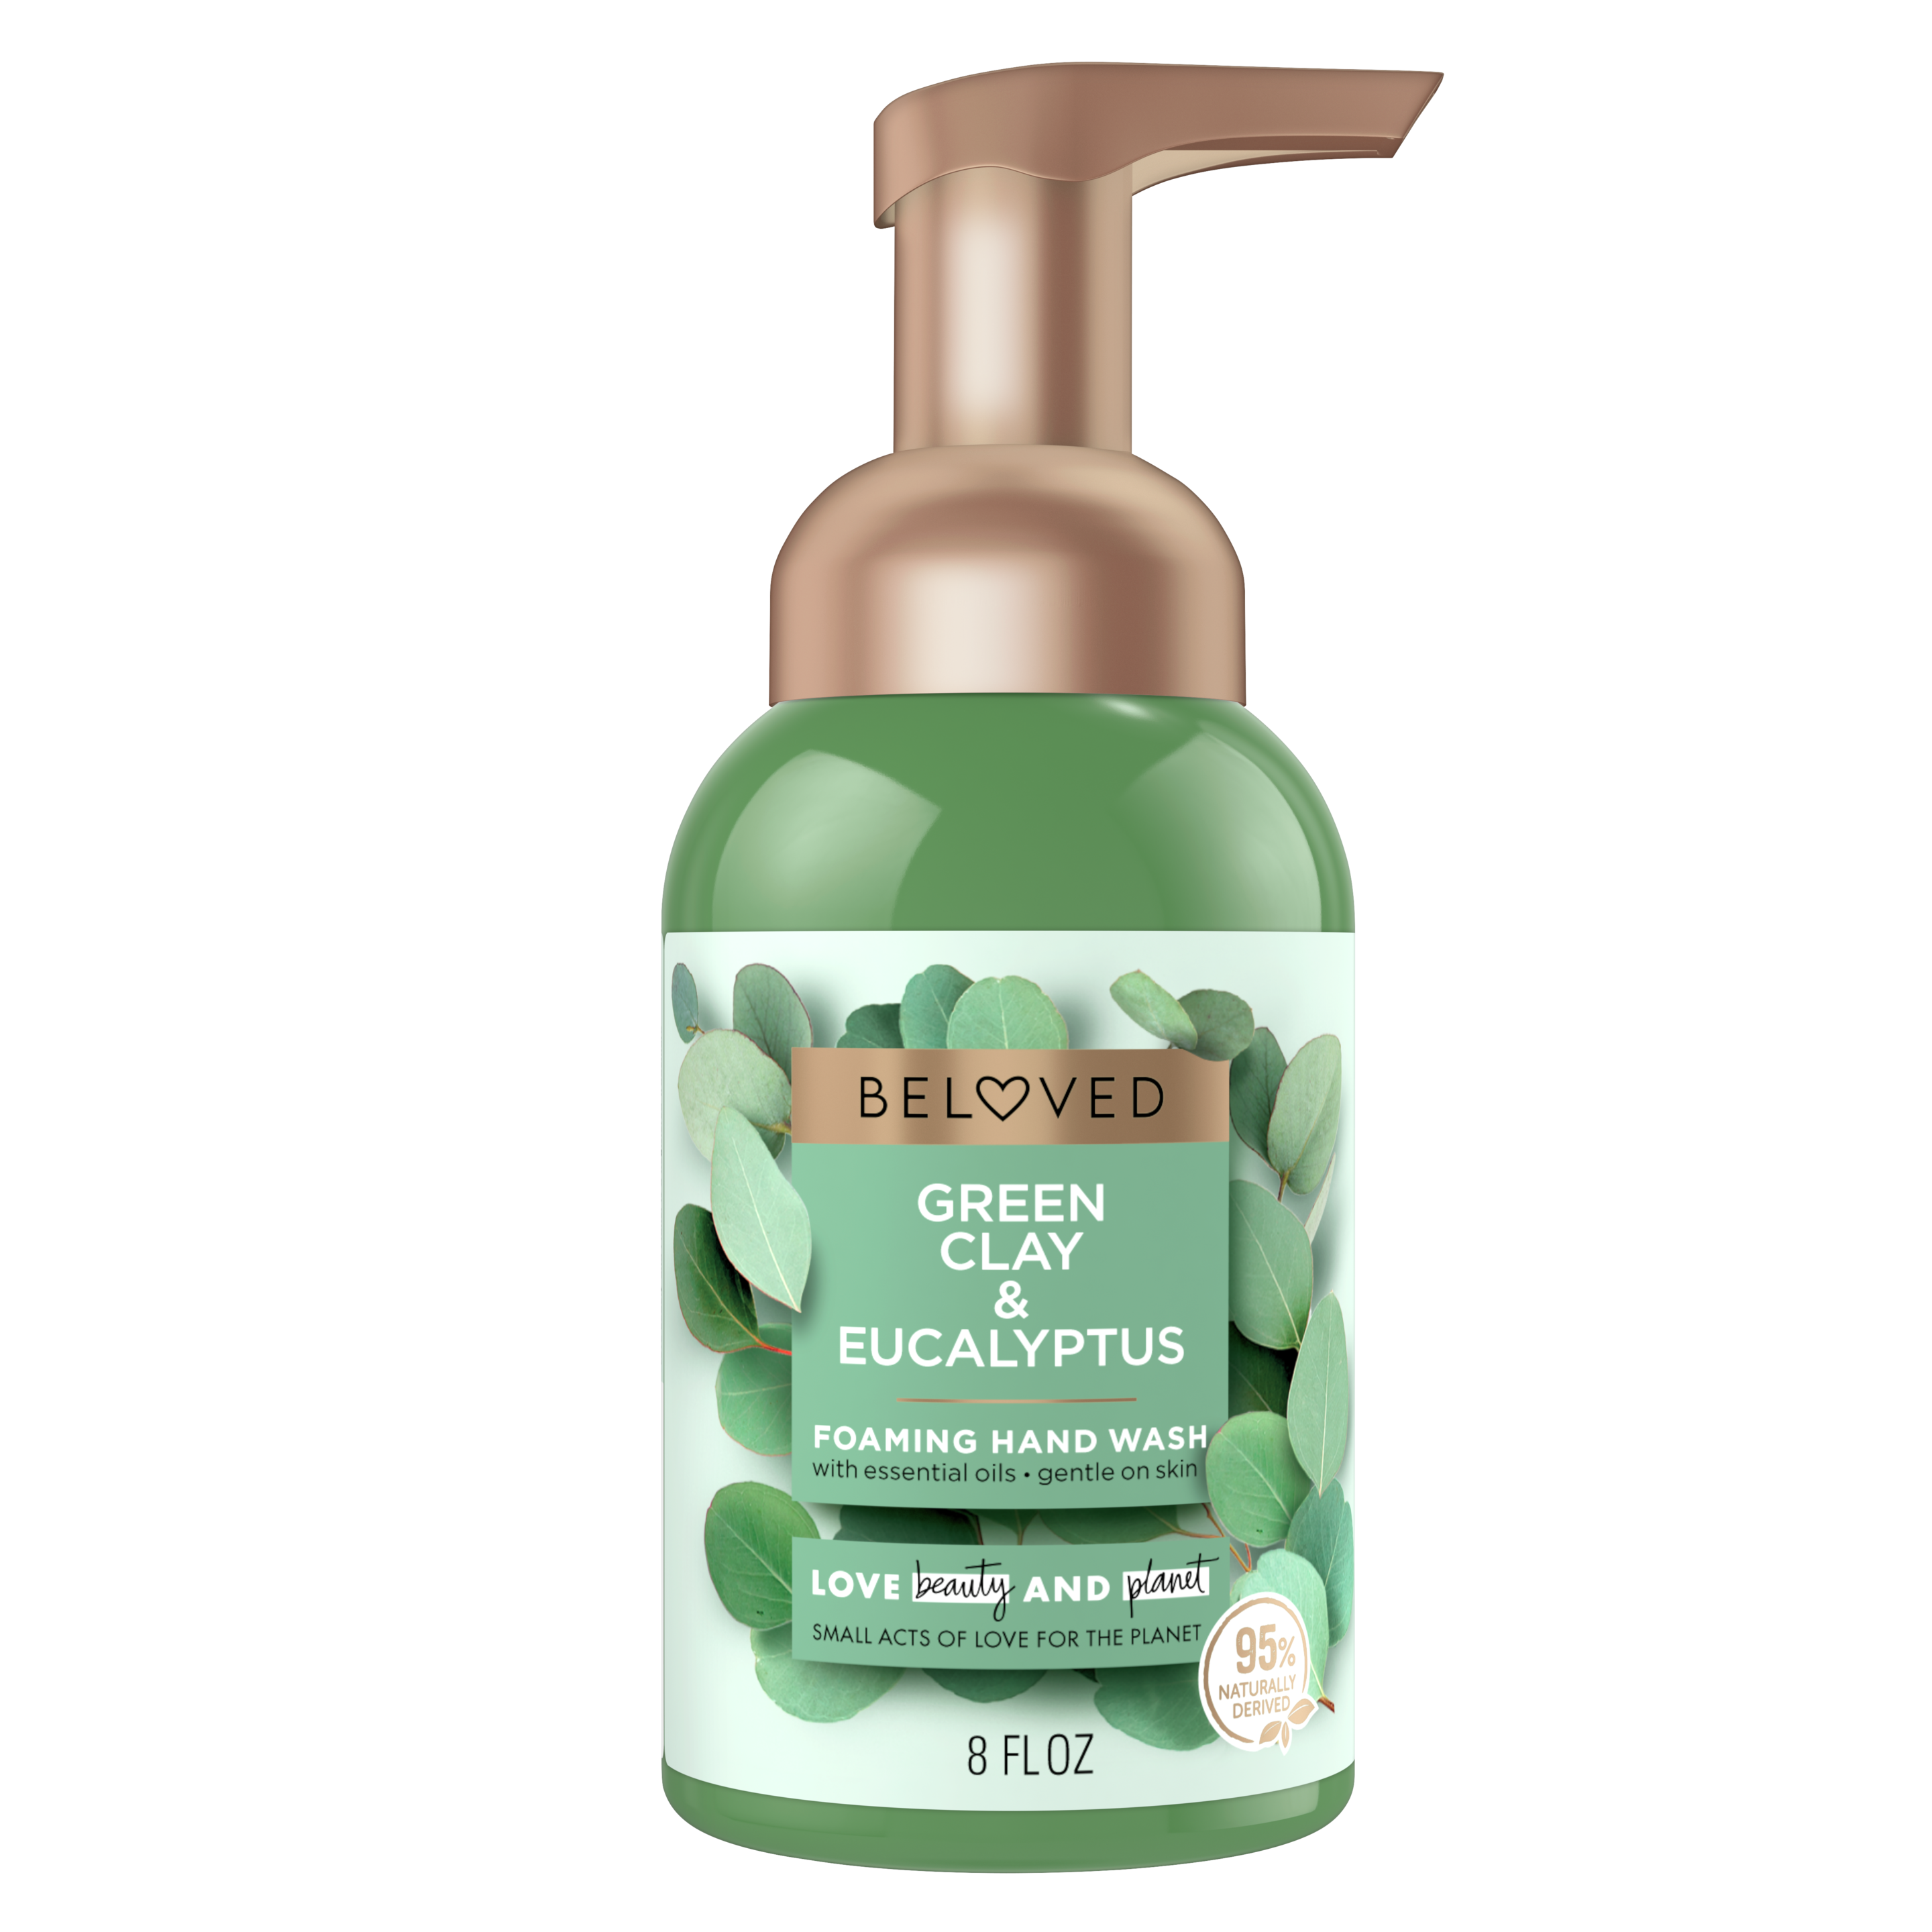 Front of foaming hand wash pack Love Beauty Planet Green Clay & Eucalyptus Foaming Hand Wash